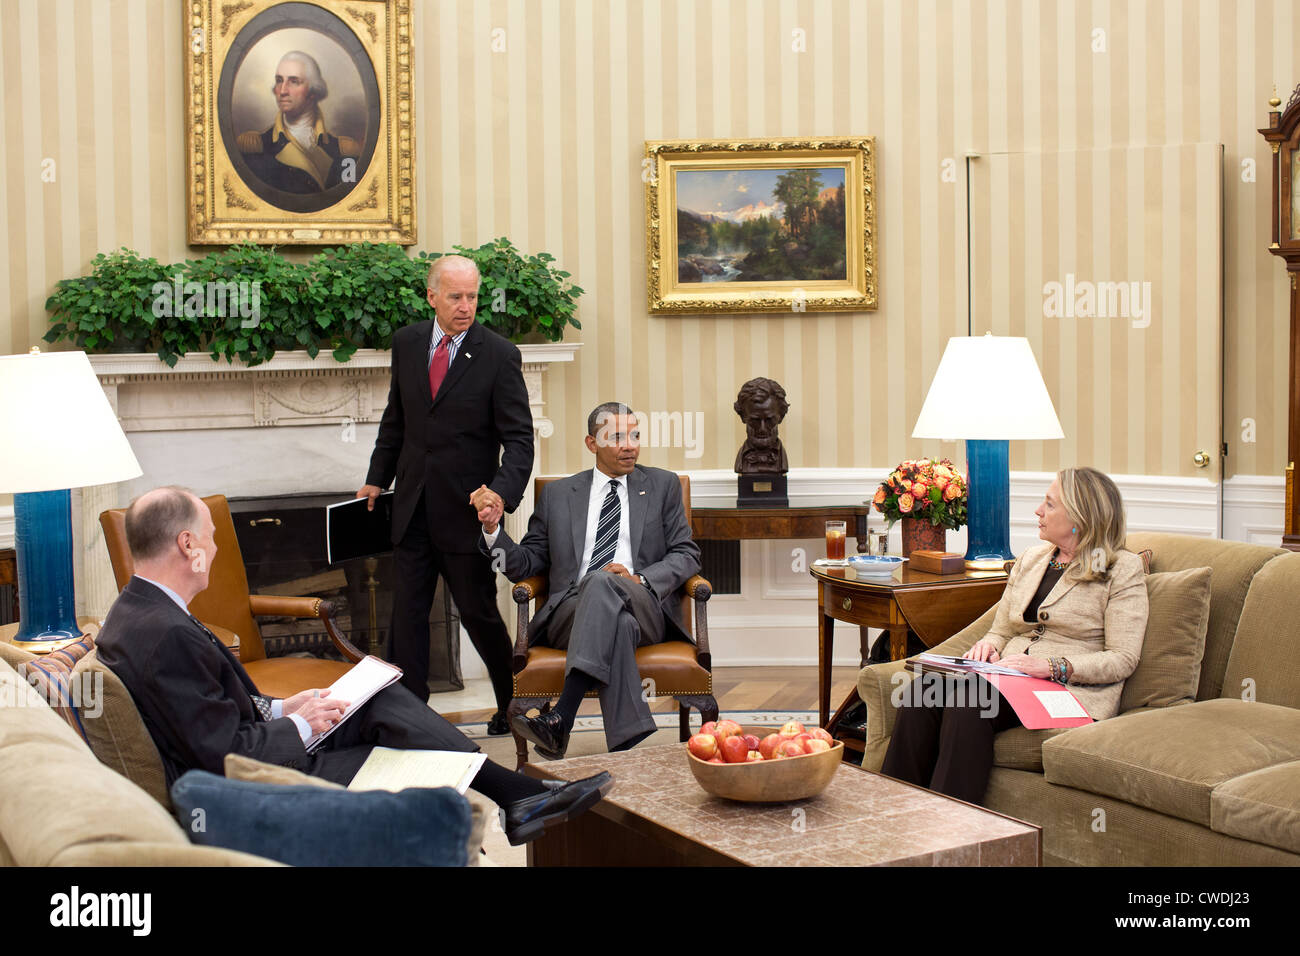 Vice President Joe Biden arrives for a meeting with President Barack Obama, Secretary of State Hillary Rodham Clinton, and National Security Advisor Tom Donilon July 18, 2012 in the Oval Office. Stock Photo